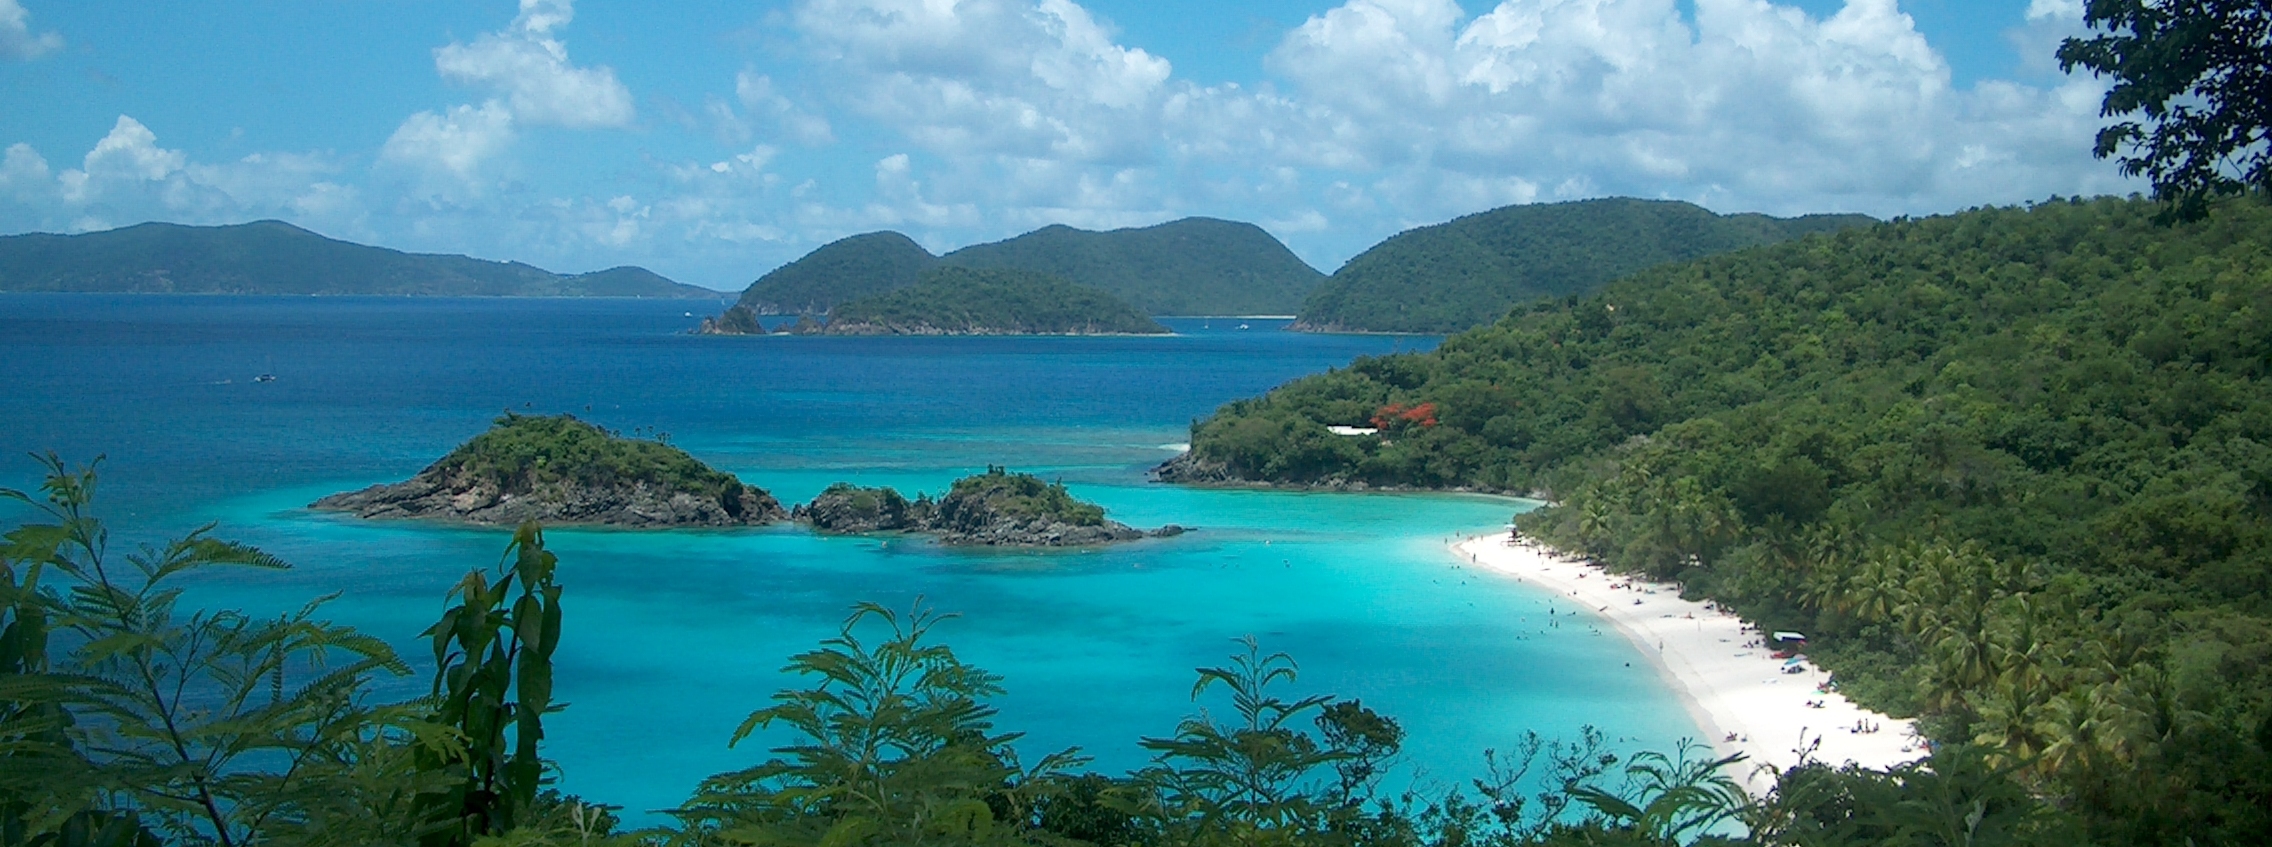 06 - Trunk Bay cropped